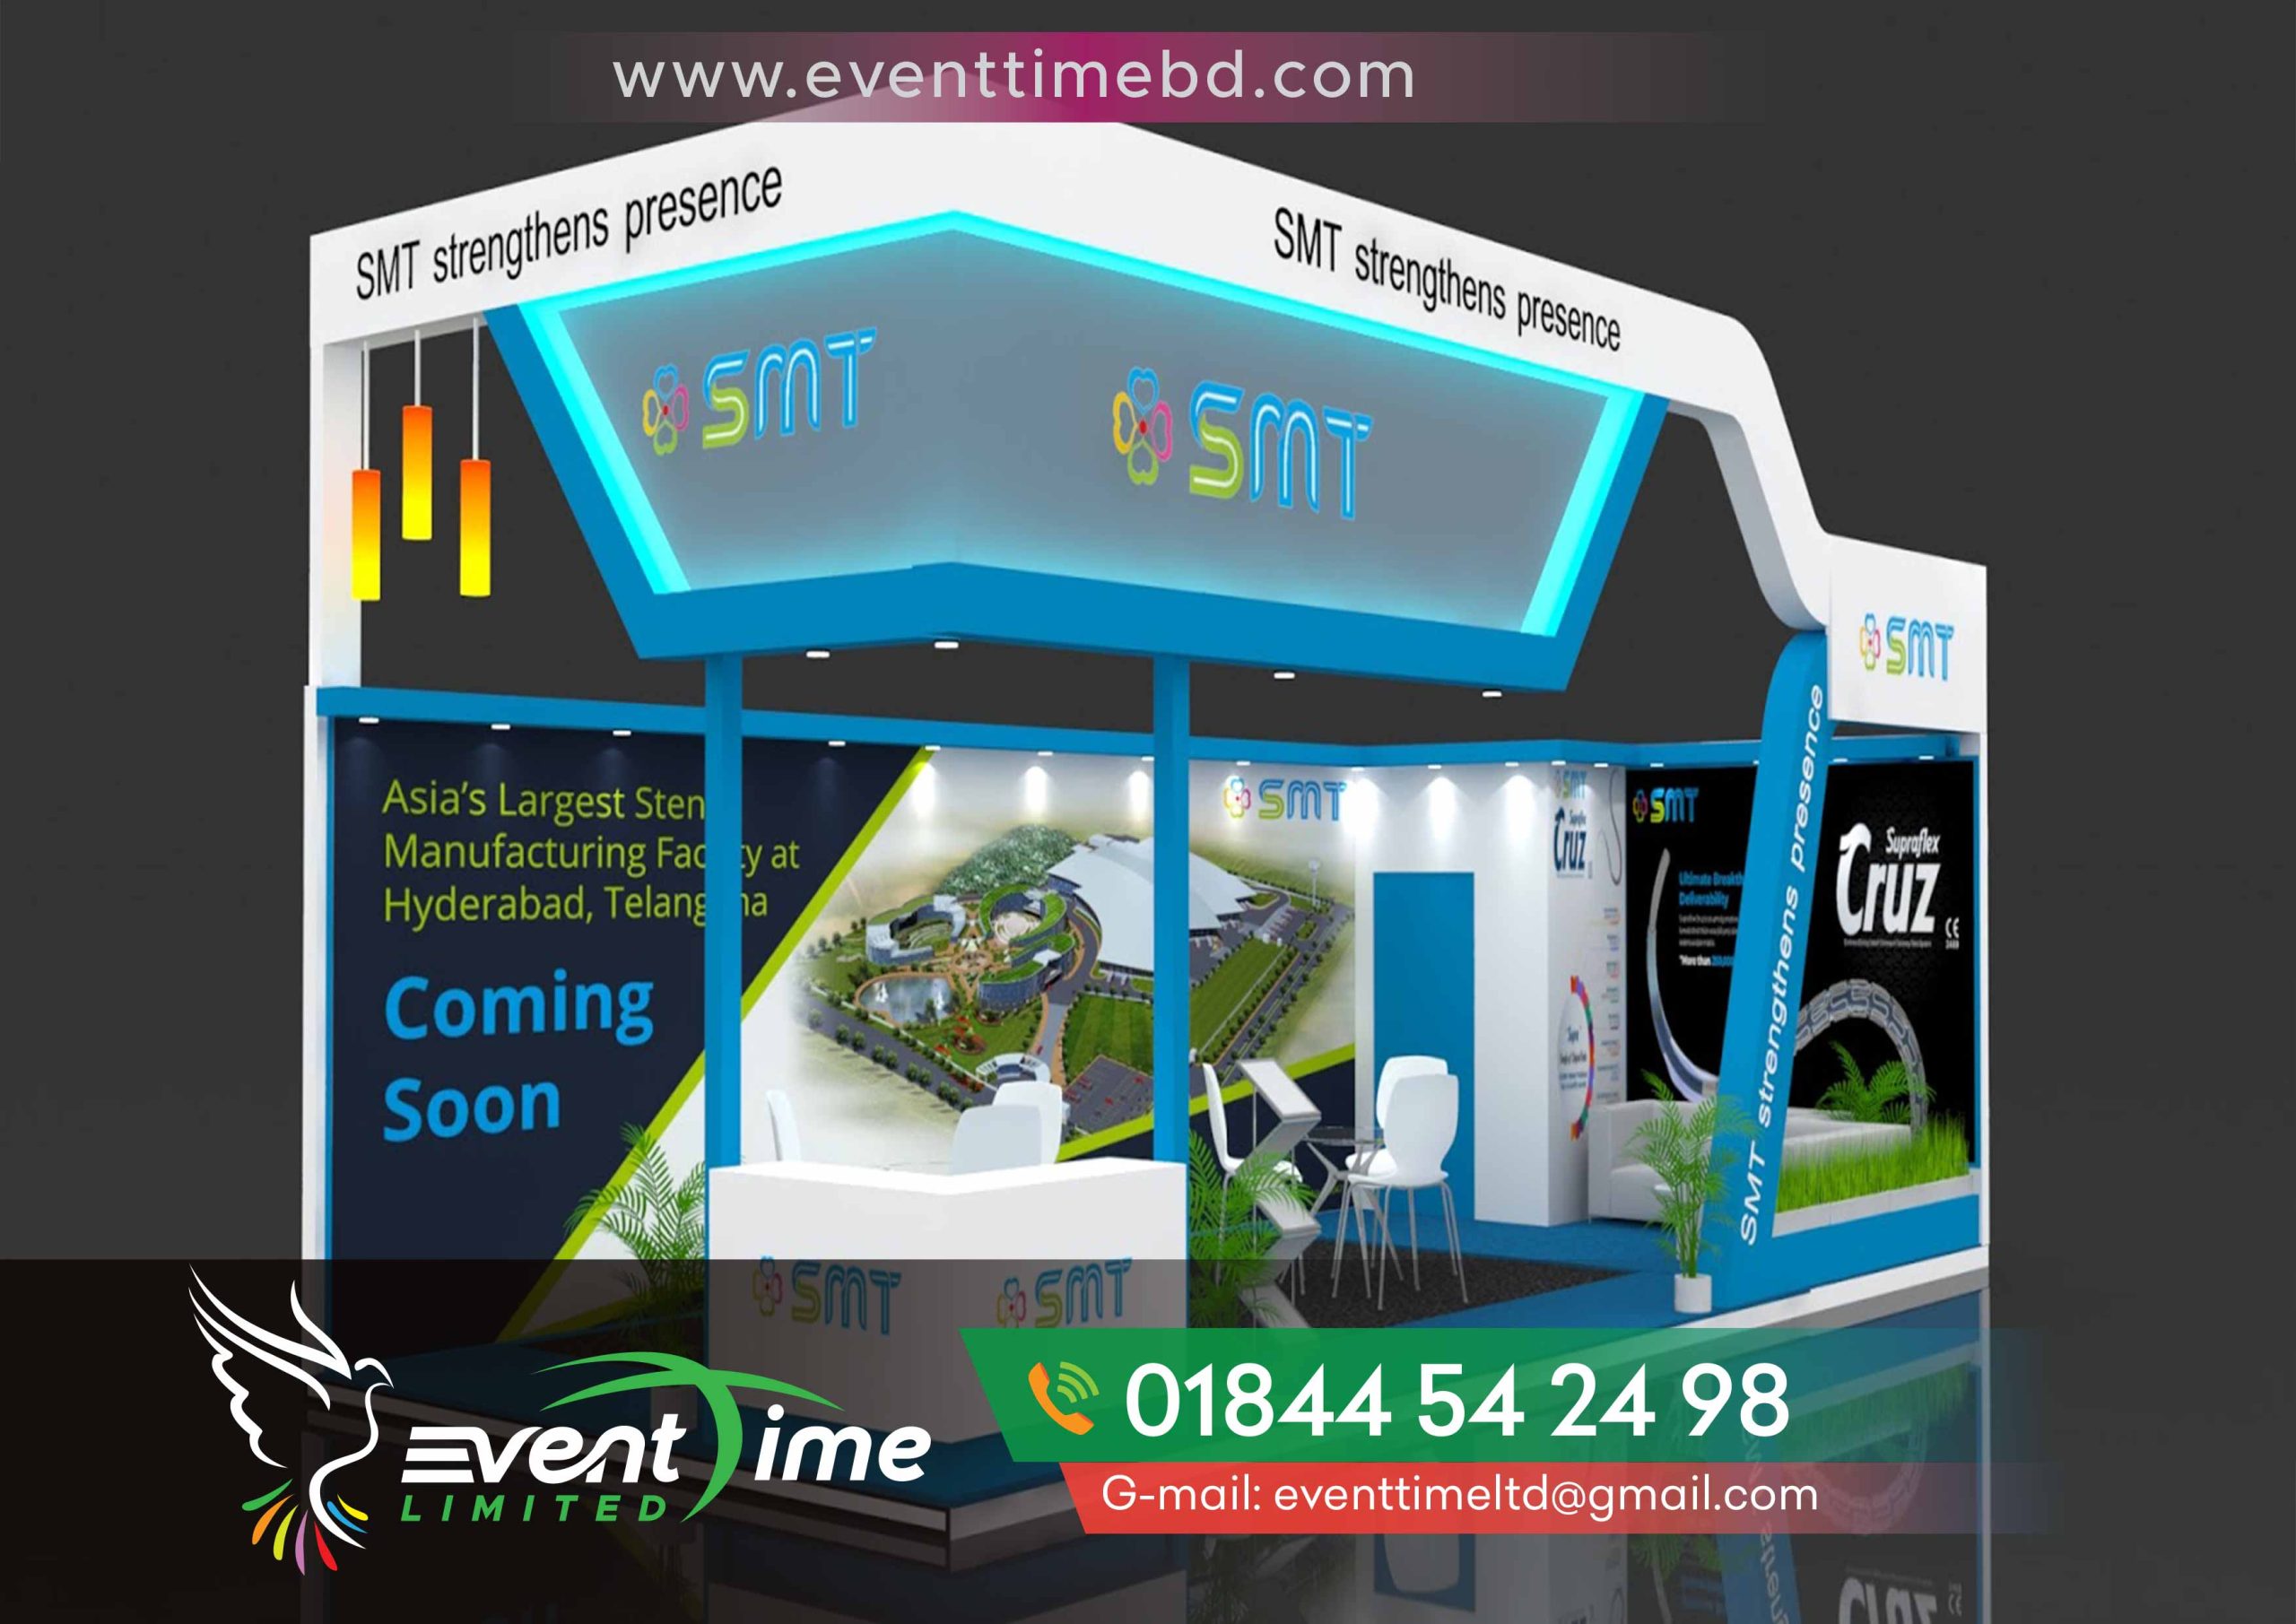 Best Exhibition stand Stands in Dhaka, bangladesh